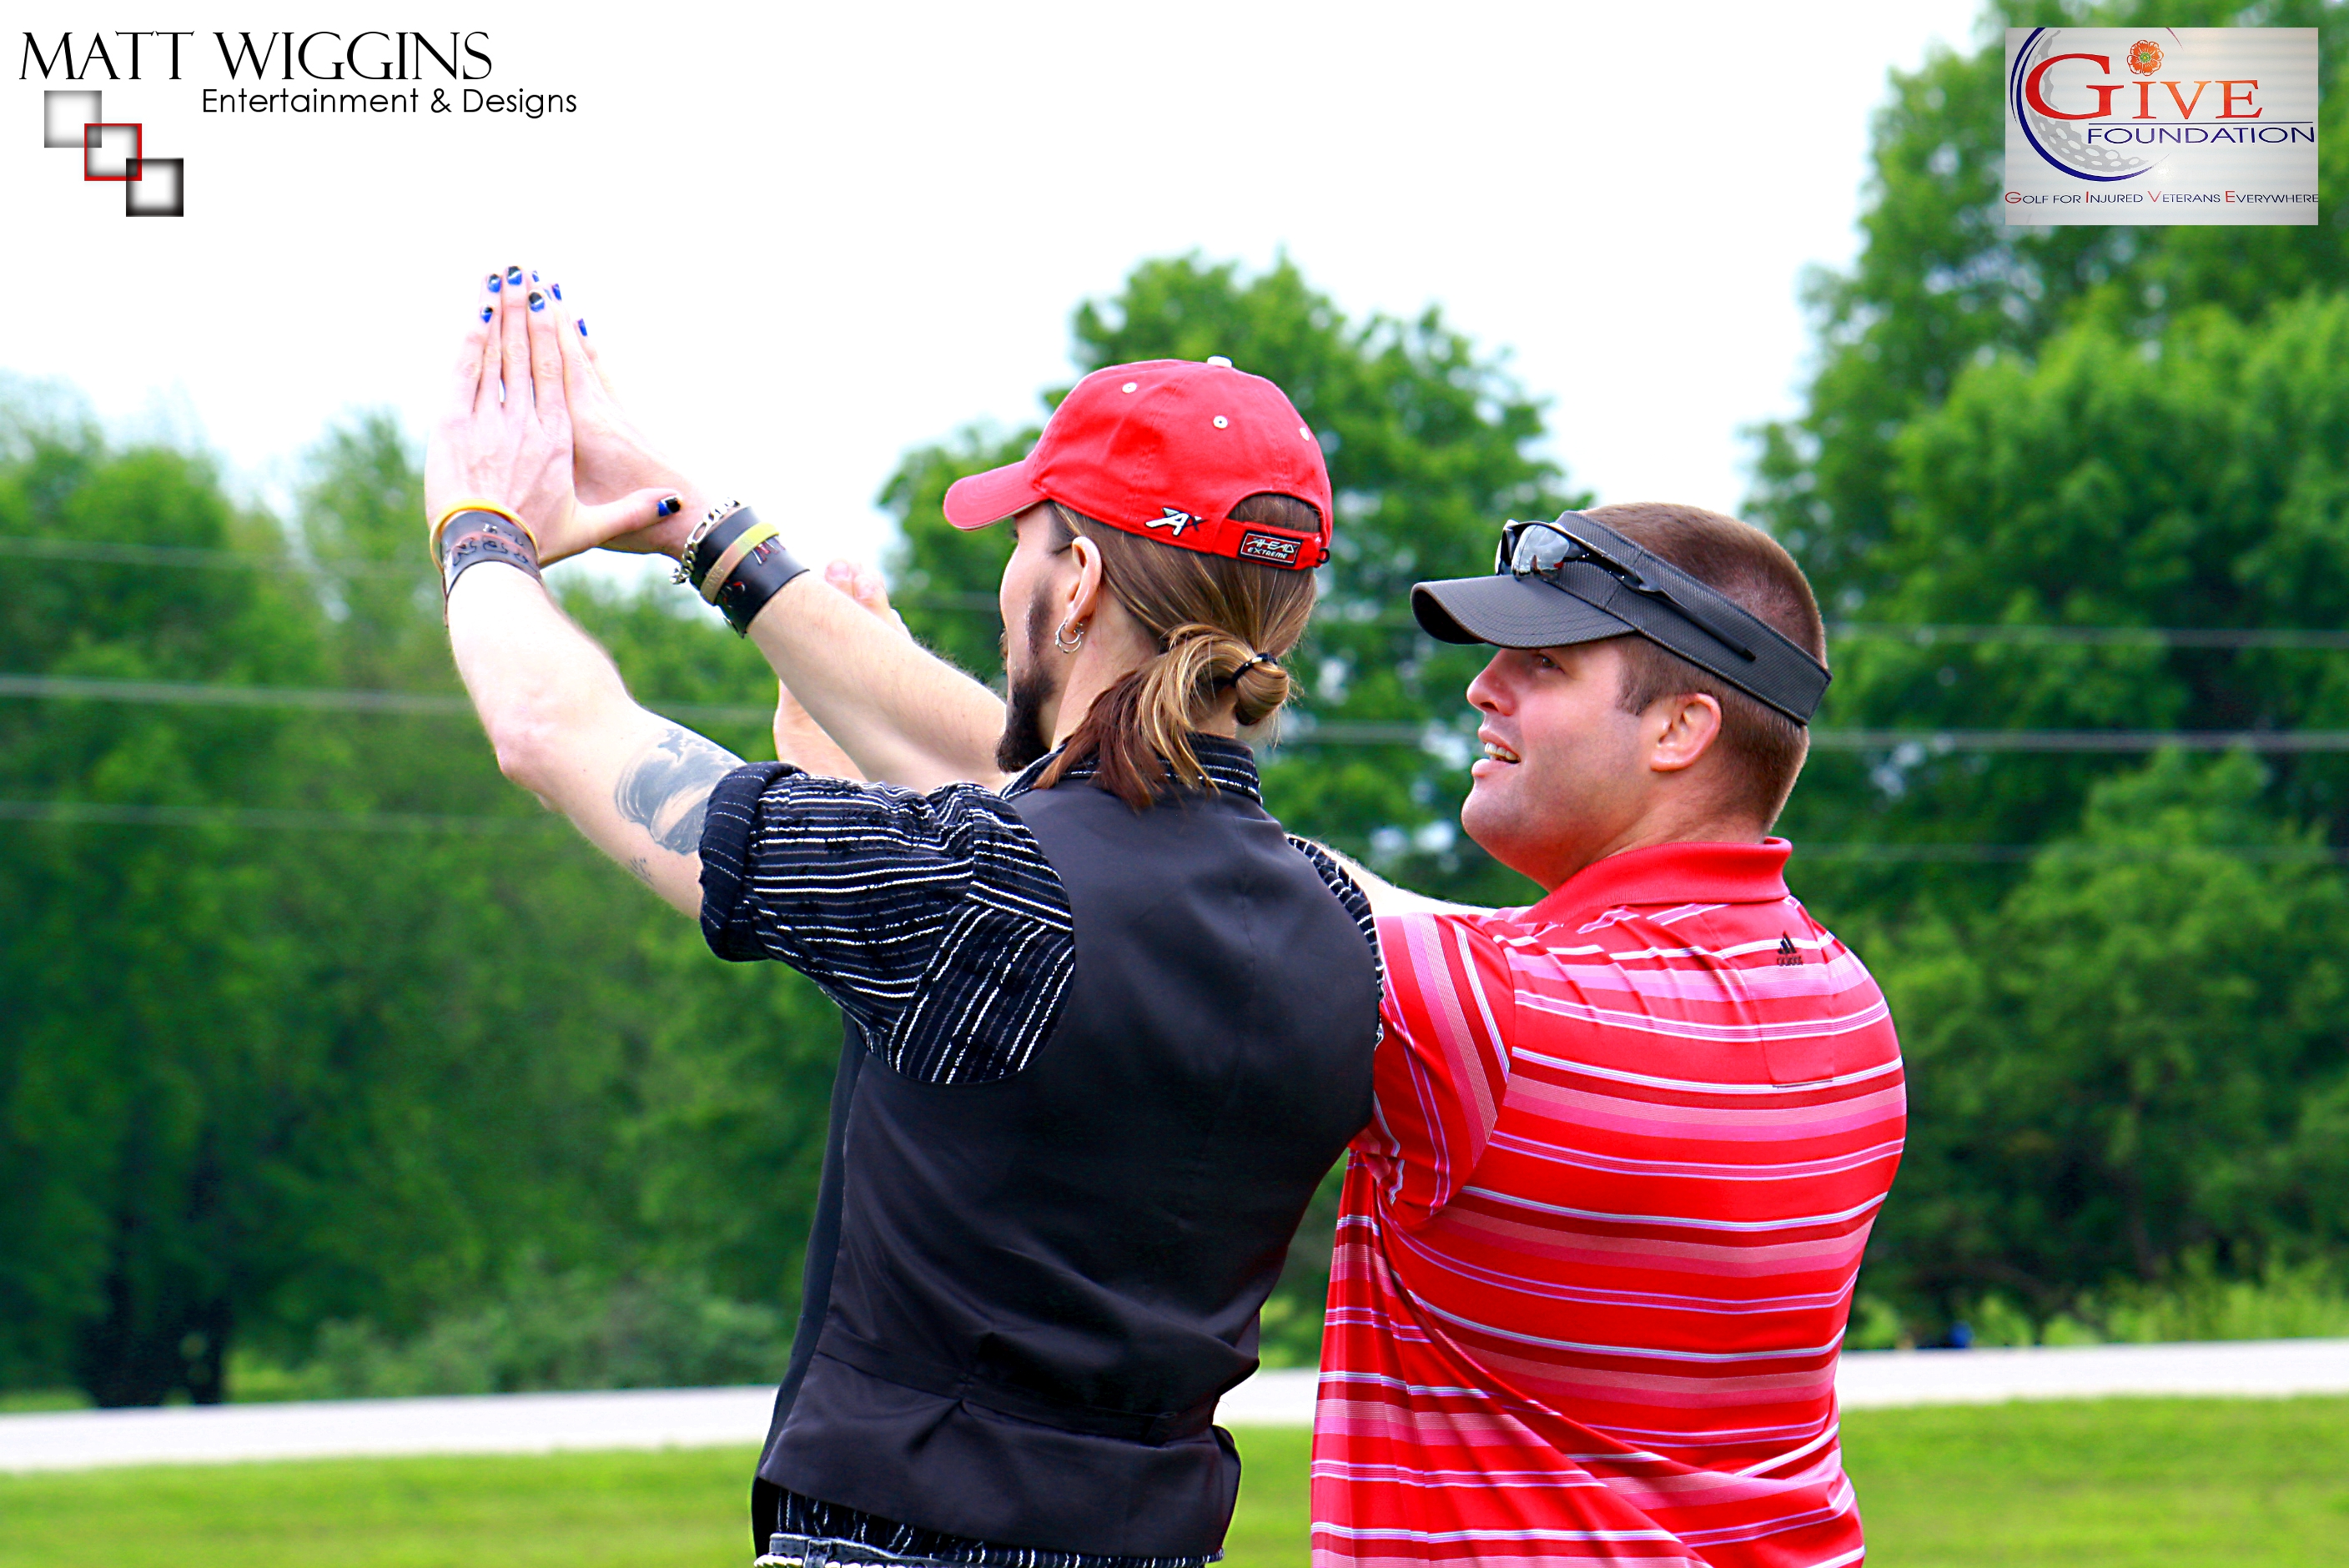 Matt Wiggins receives instruction from PGA pro's during his time with the Golf for Injured Veterans Everywhere program.